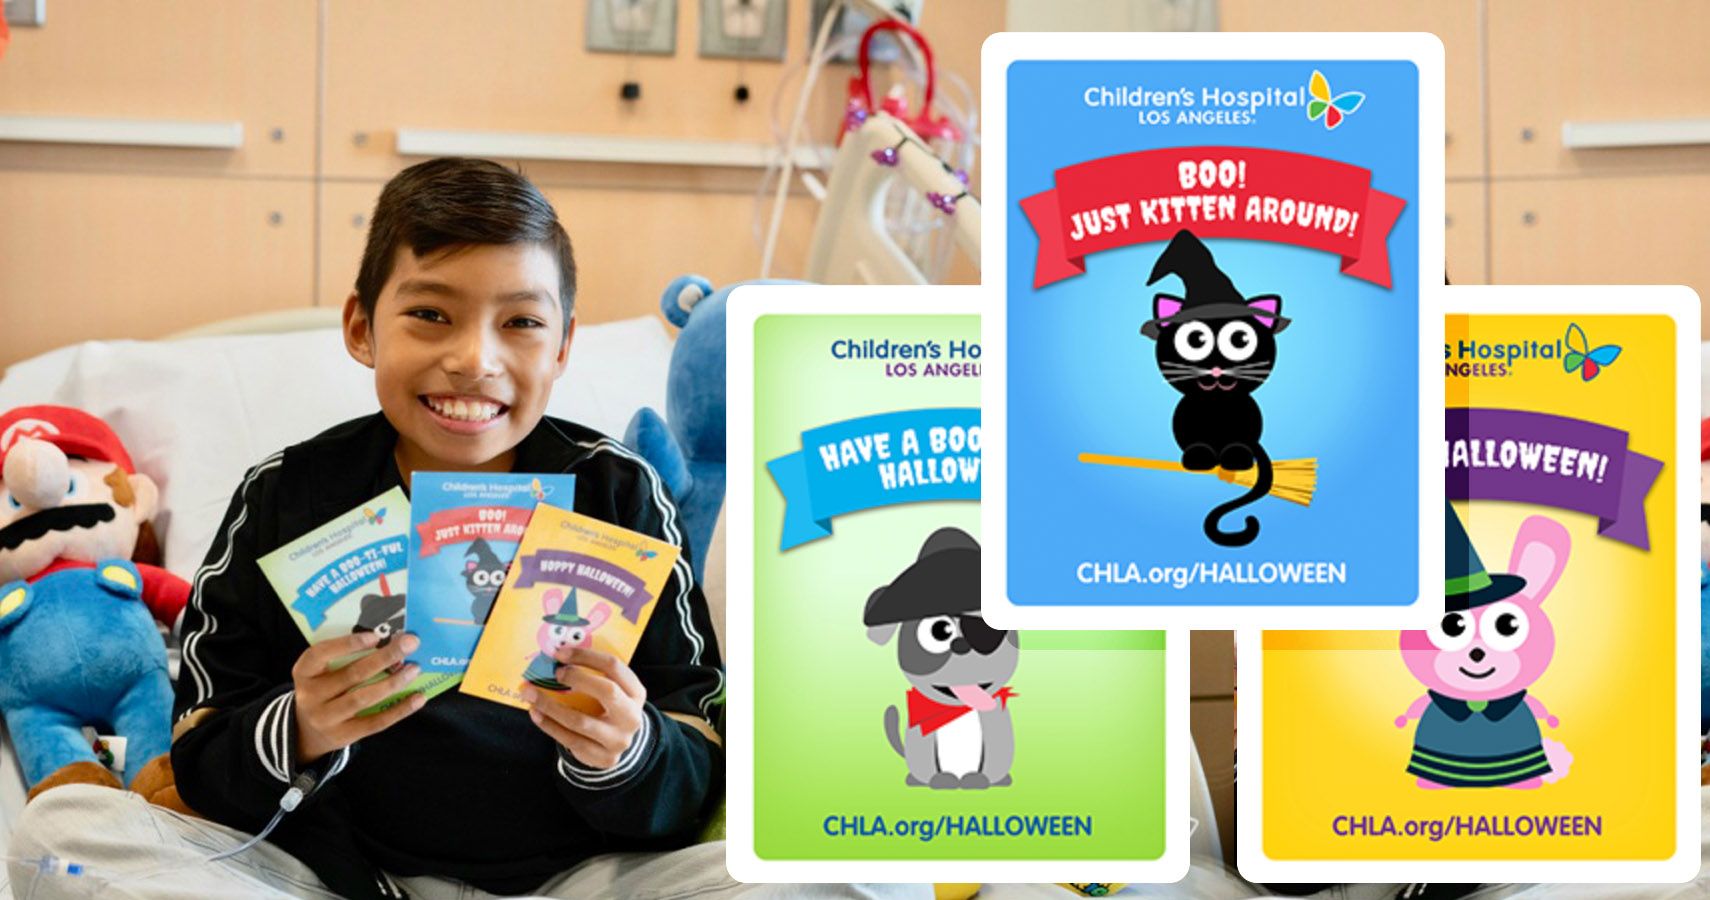 Children's Hospital Wants You To Send A Halloween Card To A Child